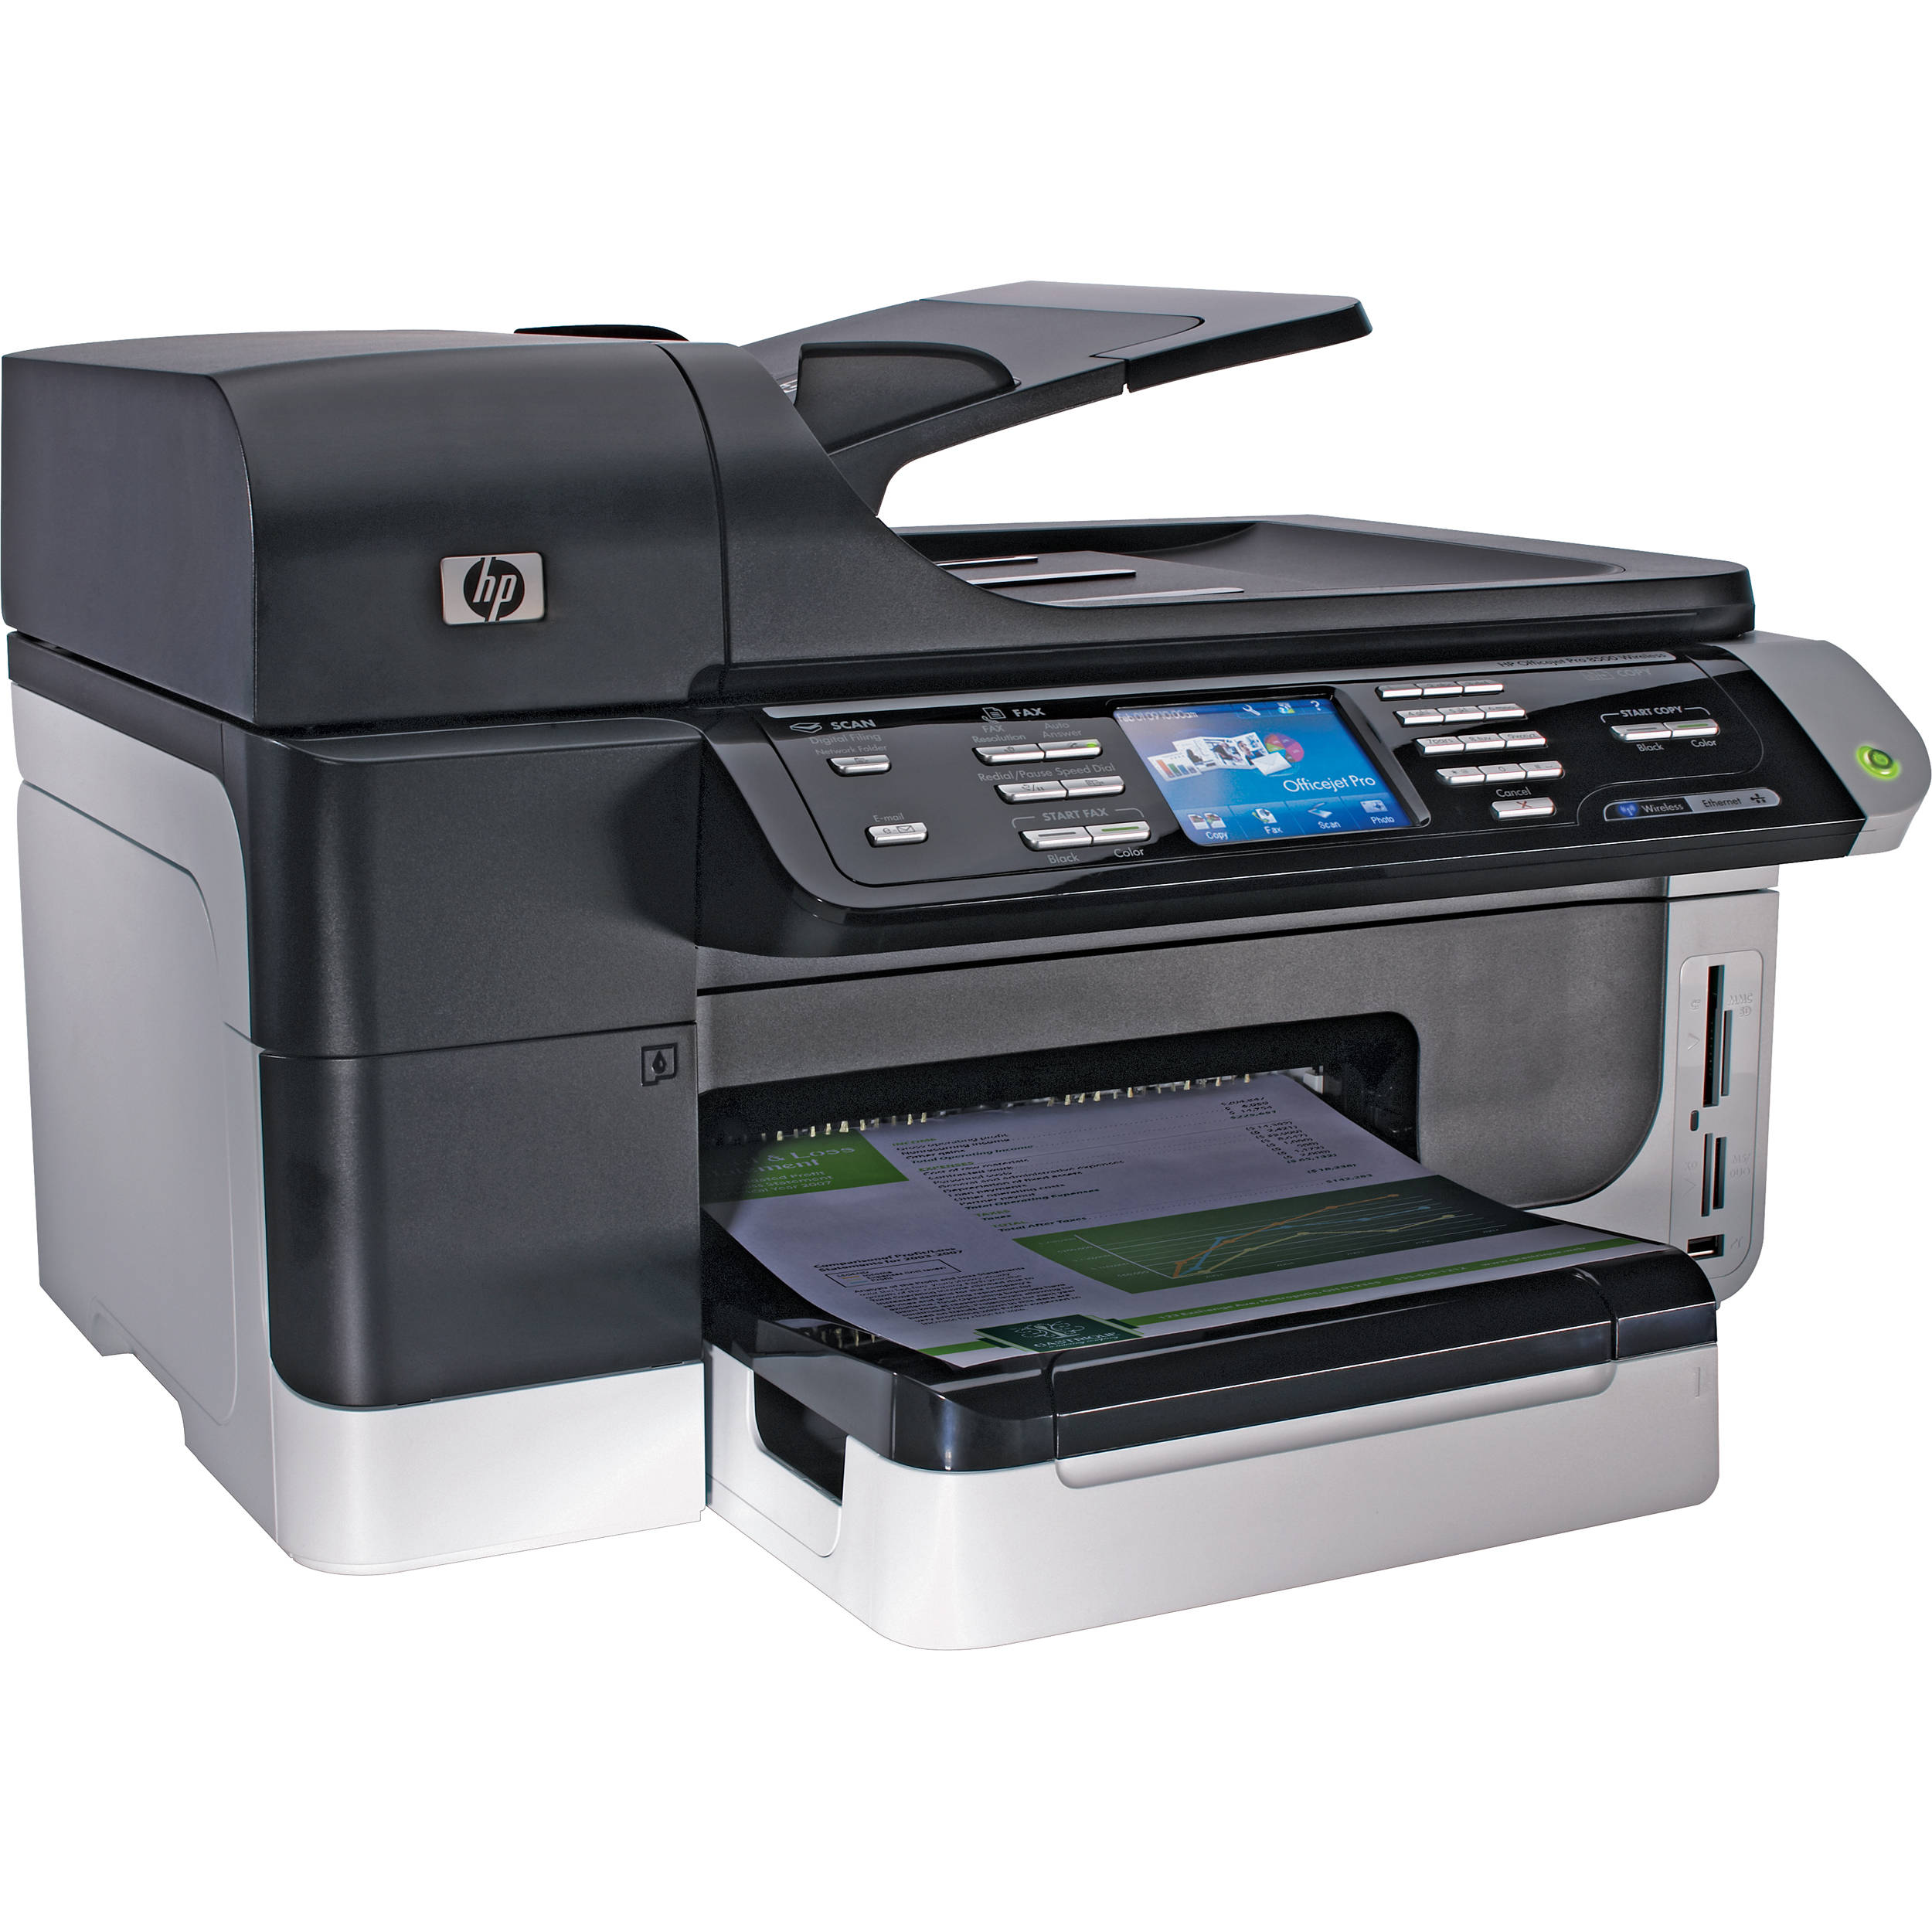 Hp Officejet Pro 8500 Wireless All In One Printer Cb023ab1h Bandh 5834